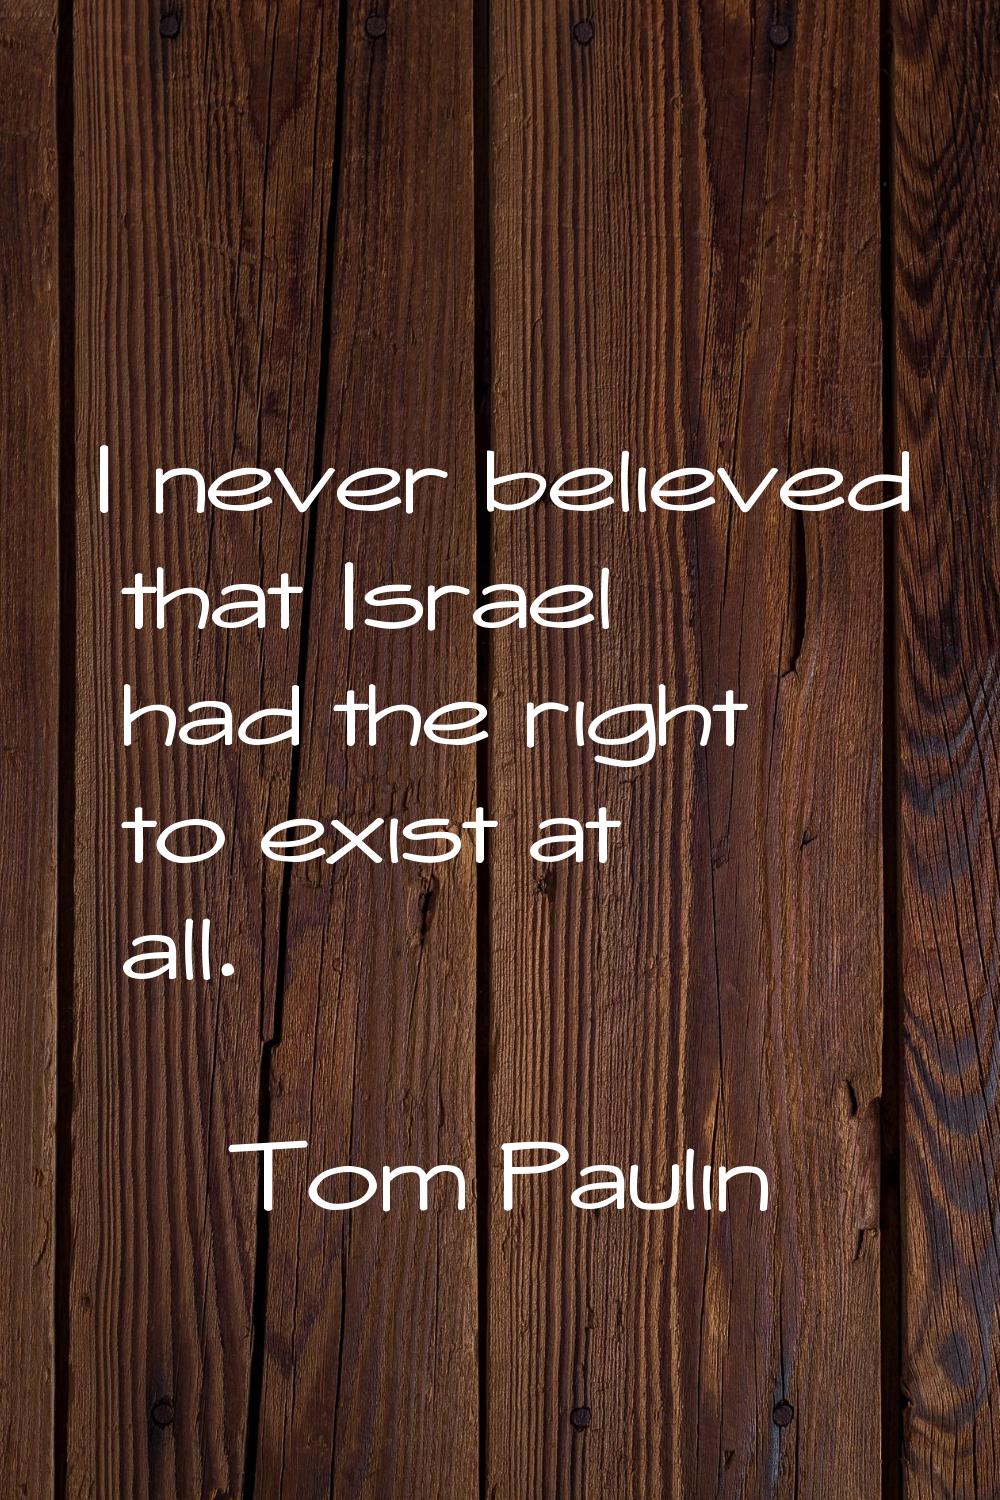 I never believed that Israel had the right to exist at all.